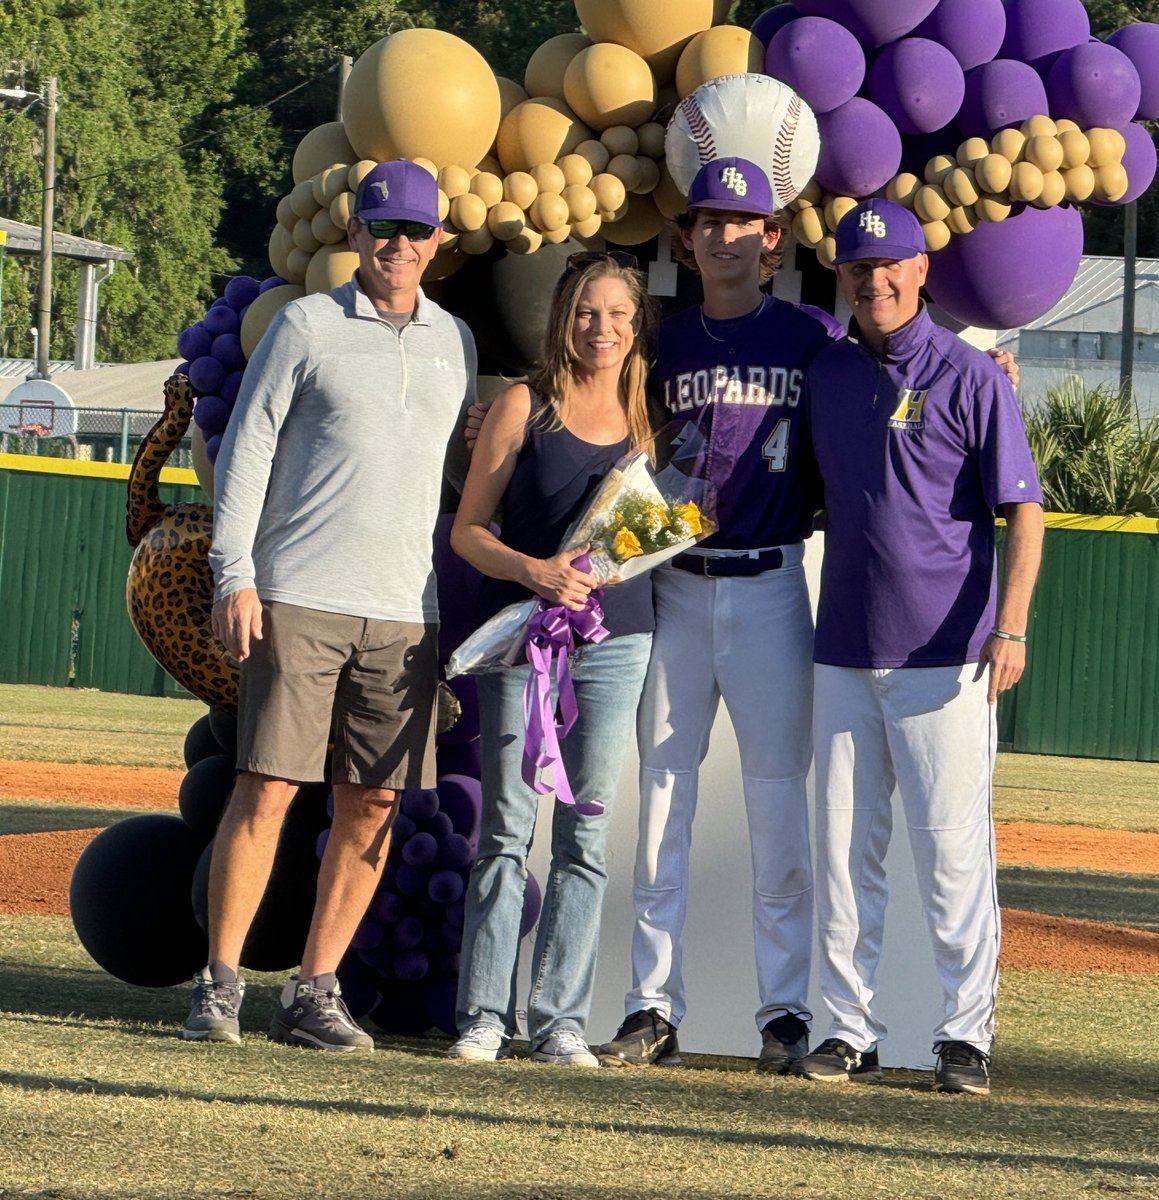 Hernando wins on Senior night!!!! C. Cloud and R. Miller pitched a combined shutout. P. Looper led the Leopards with 2 hits. Thank you to Hart’s Meat market,our sponsors, and all of our families for a great night!!! @Furncoach @leopardsath